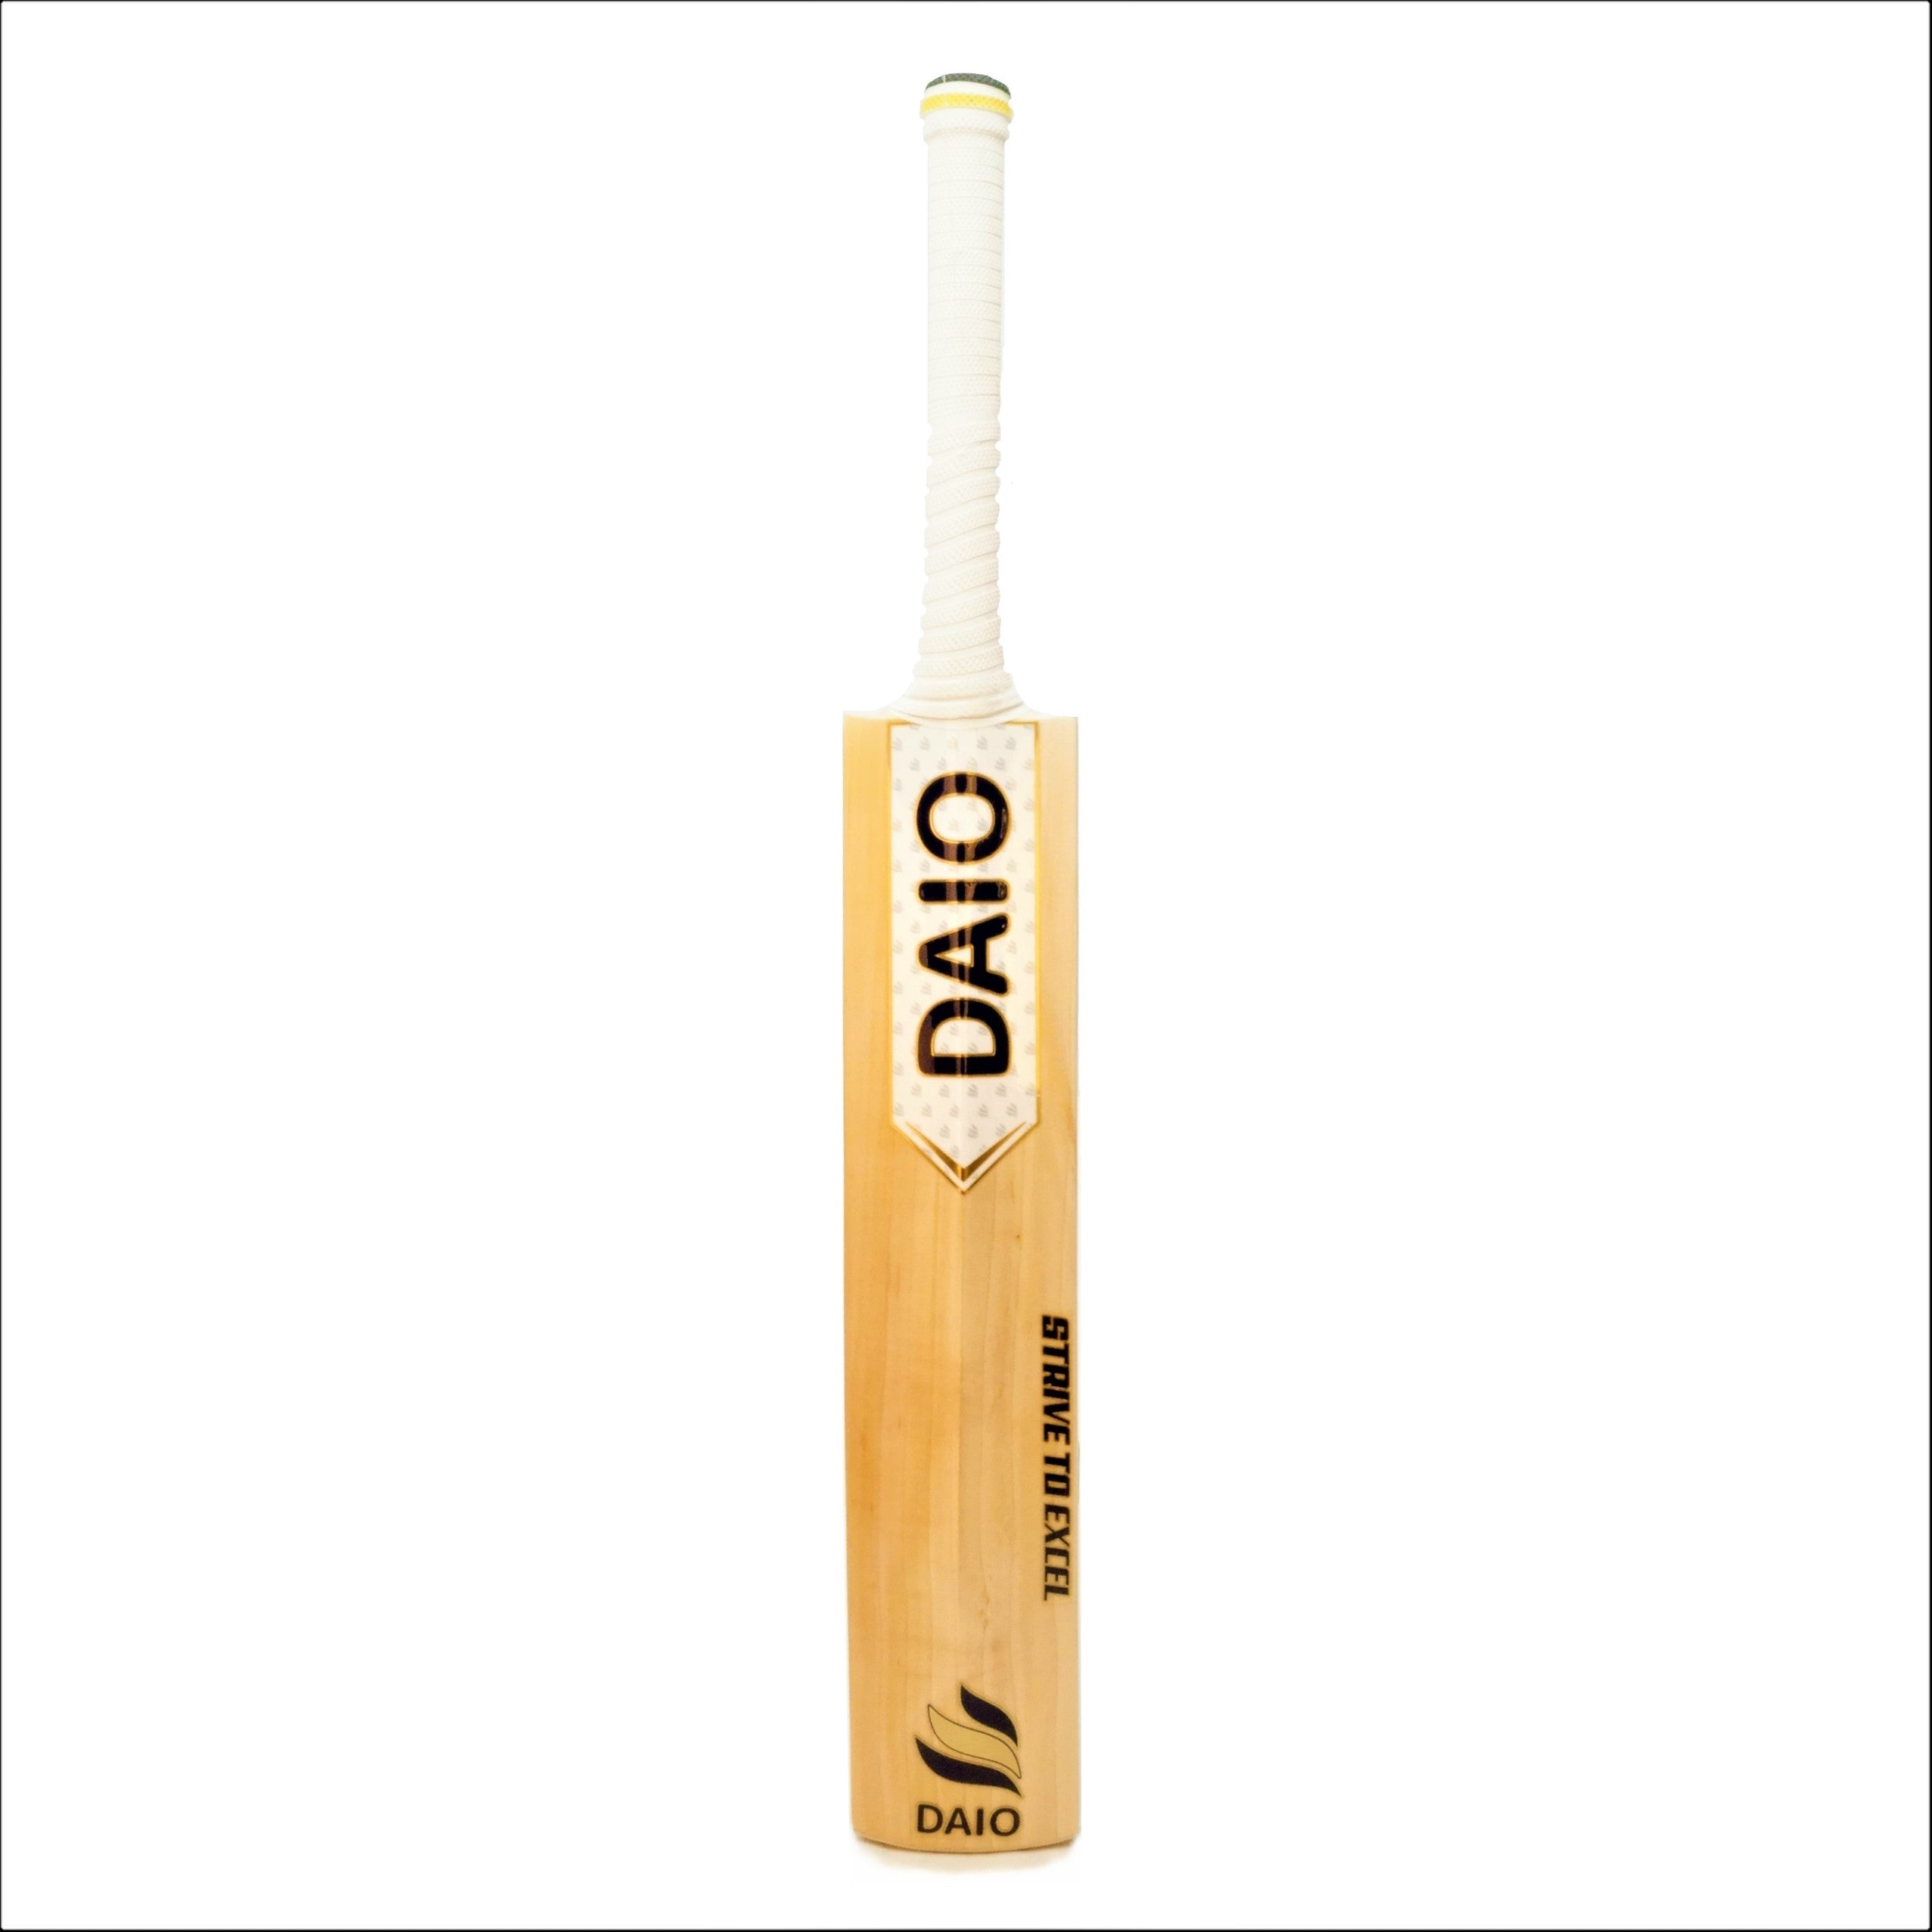 Daio edition English willow bat, size 6 & 5 only